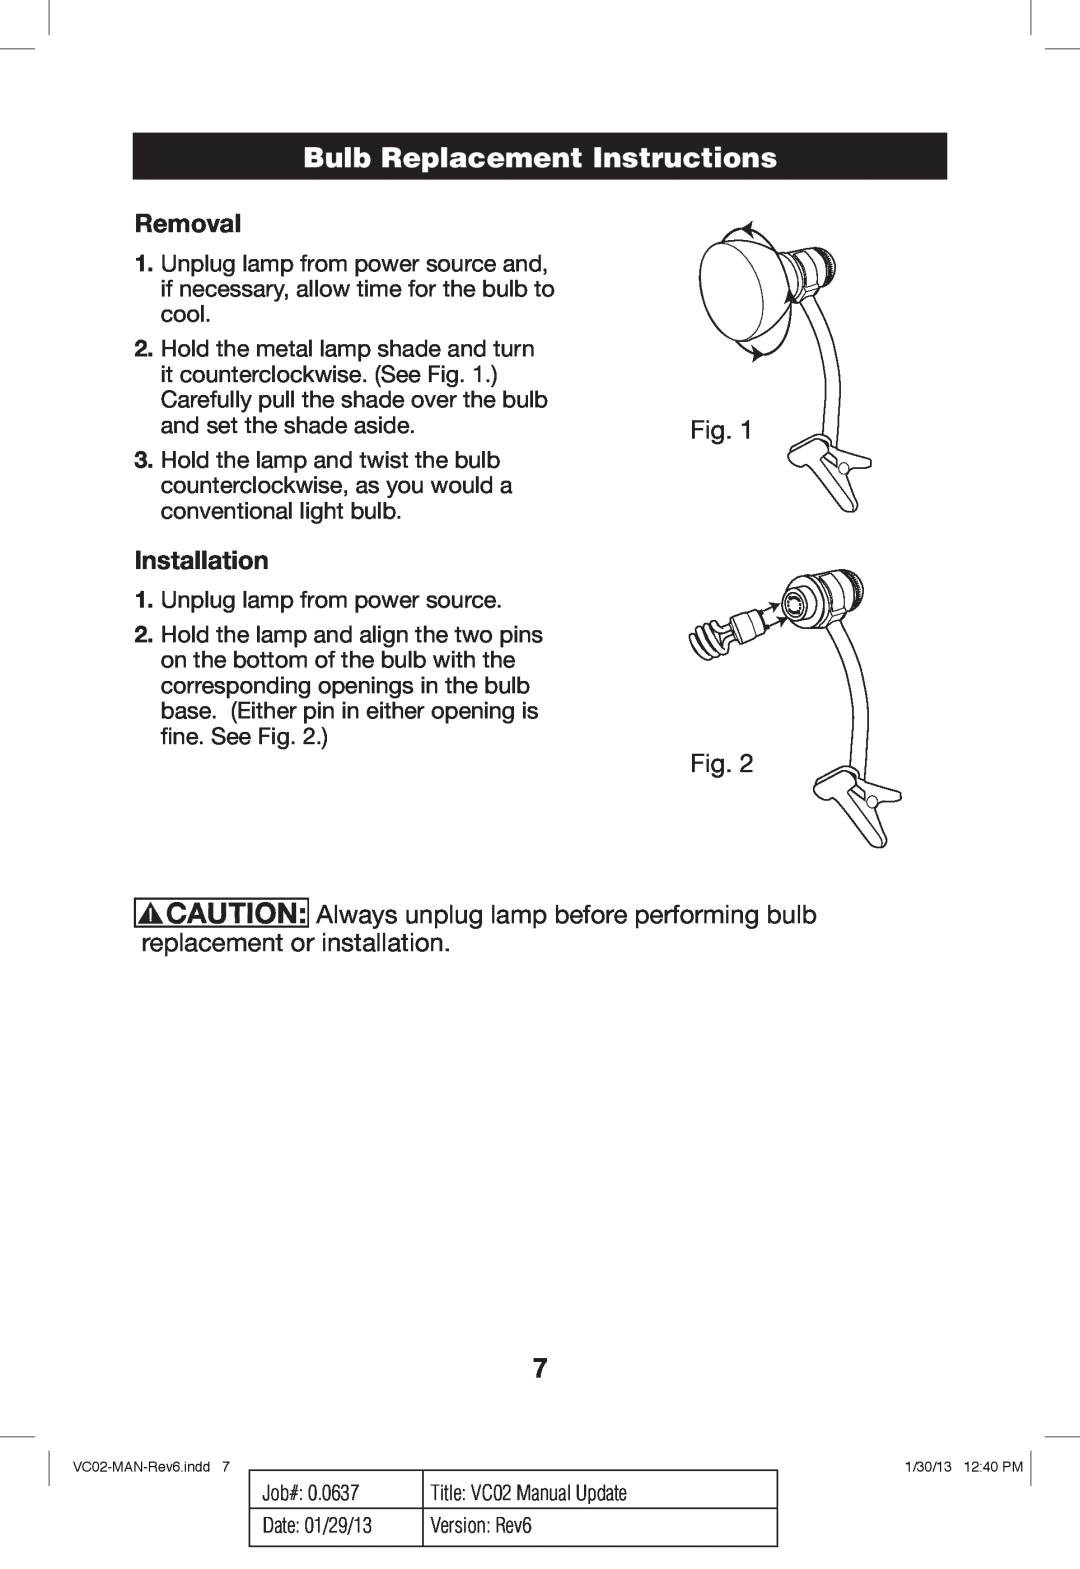 Verilux VC02 manual Bulb Replacement Instructions, Removal, Installation 